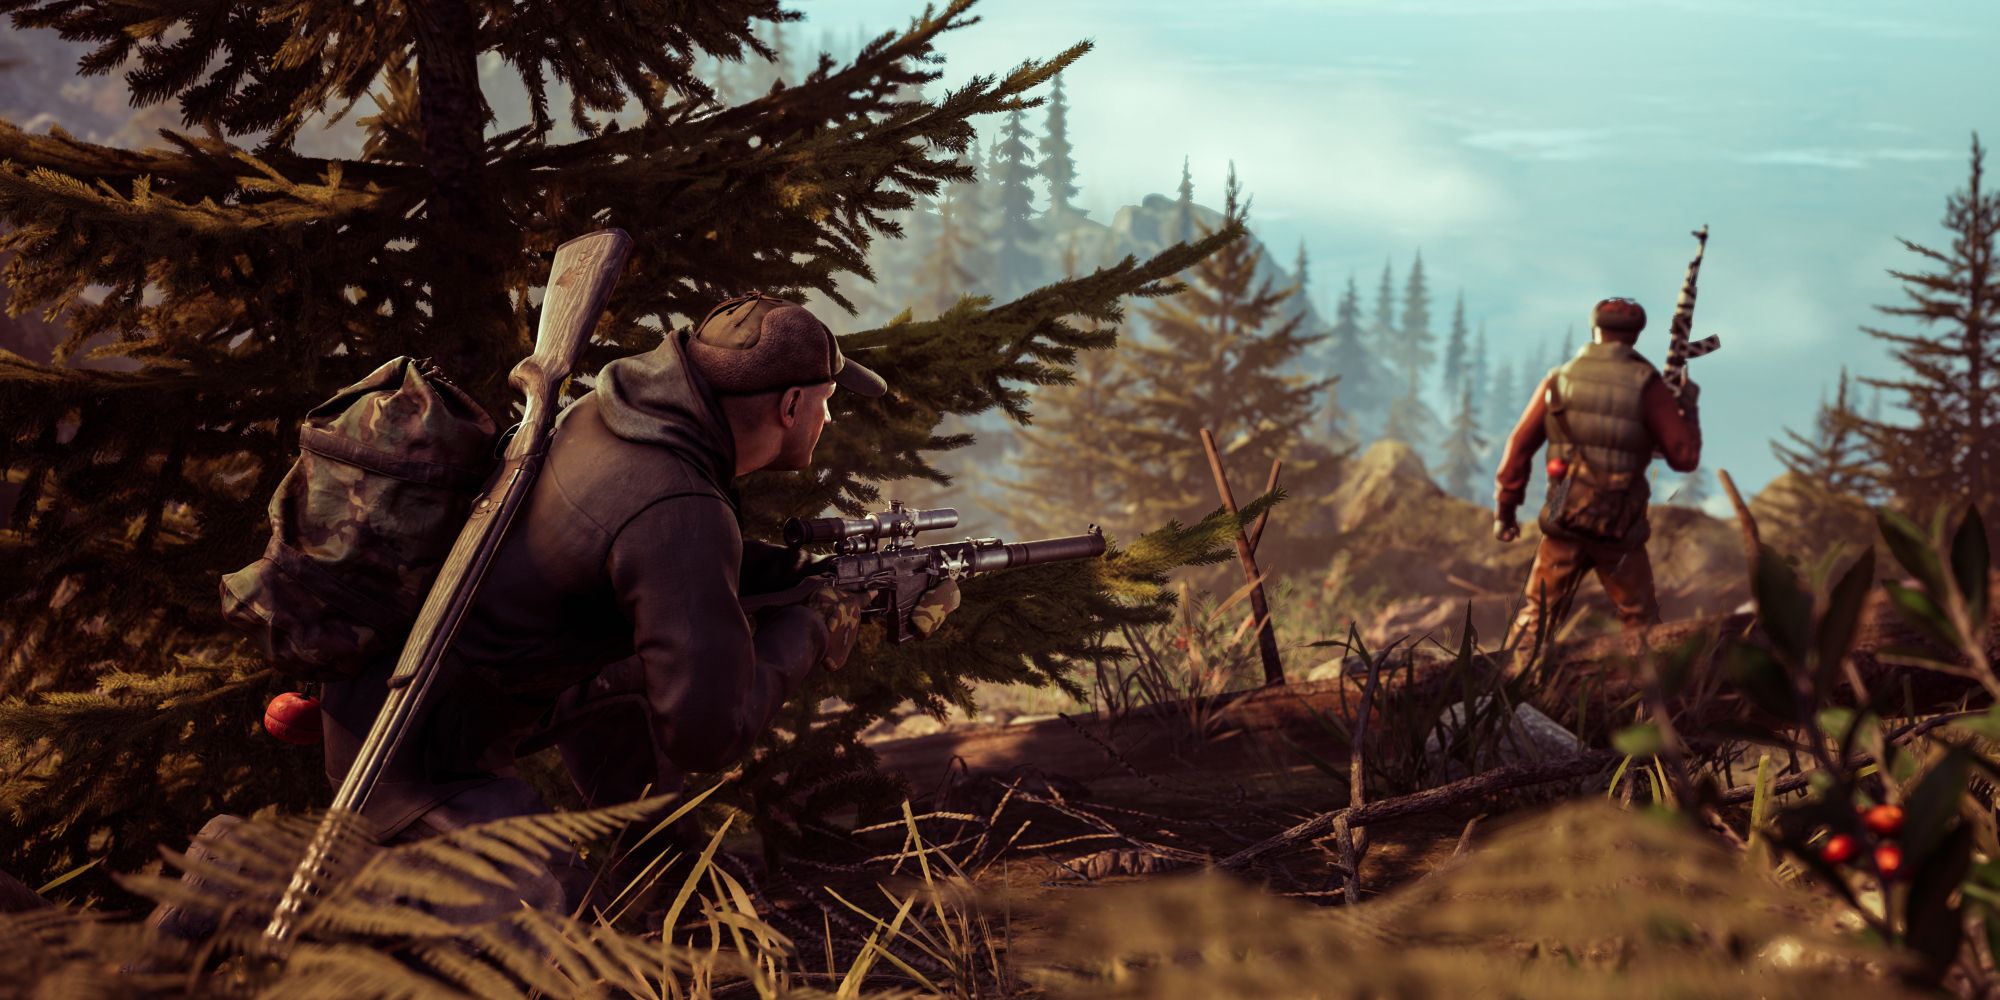 Vigor Screenshot Of One Player With Rifle Sneaking Up To Another